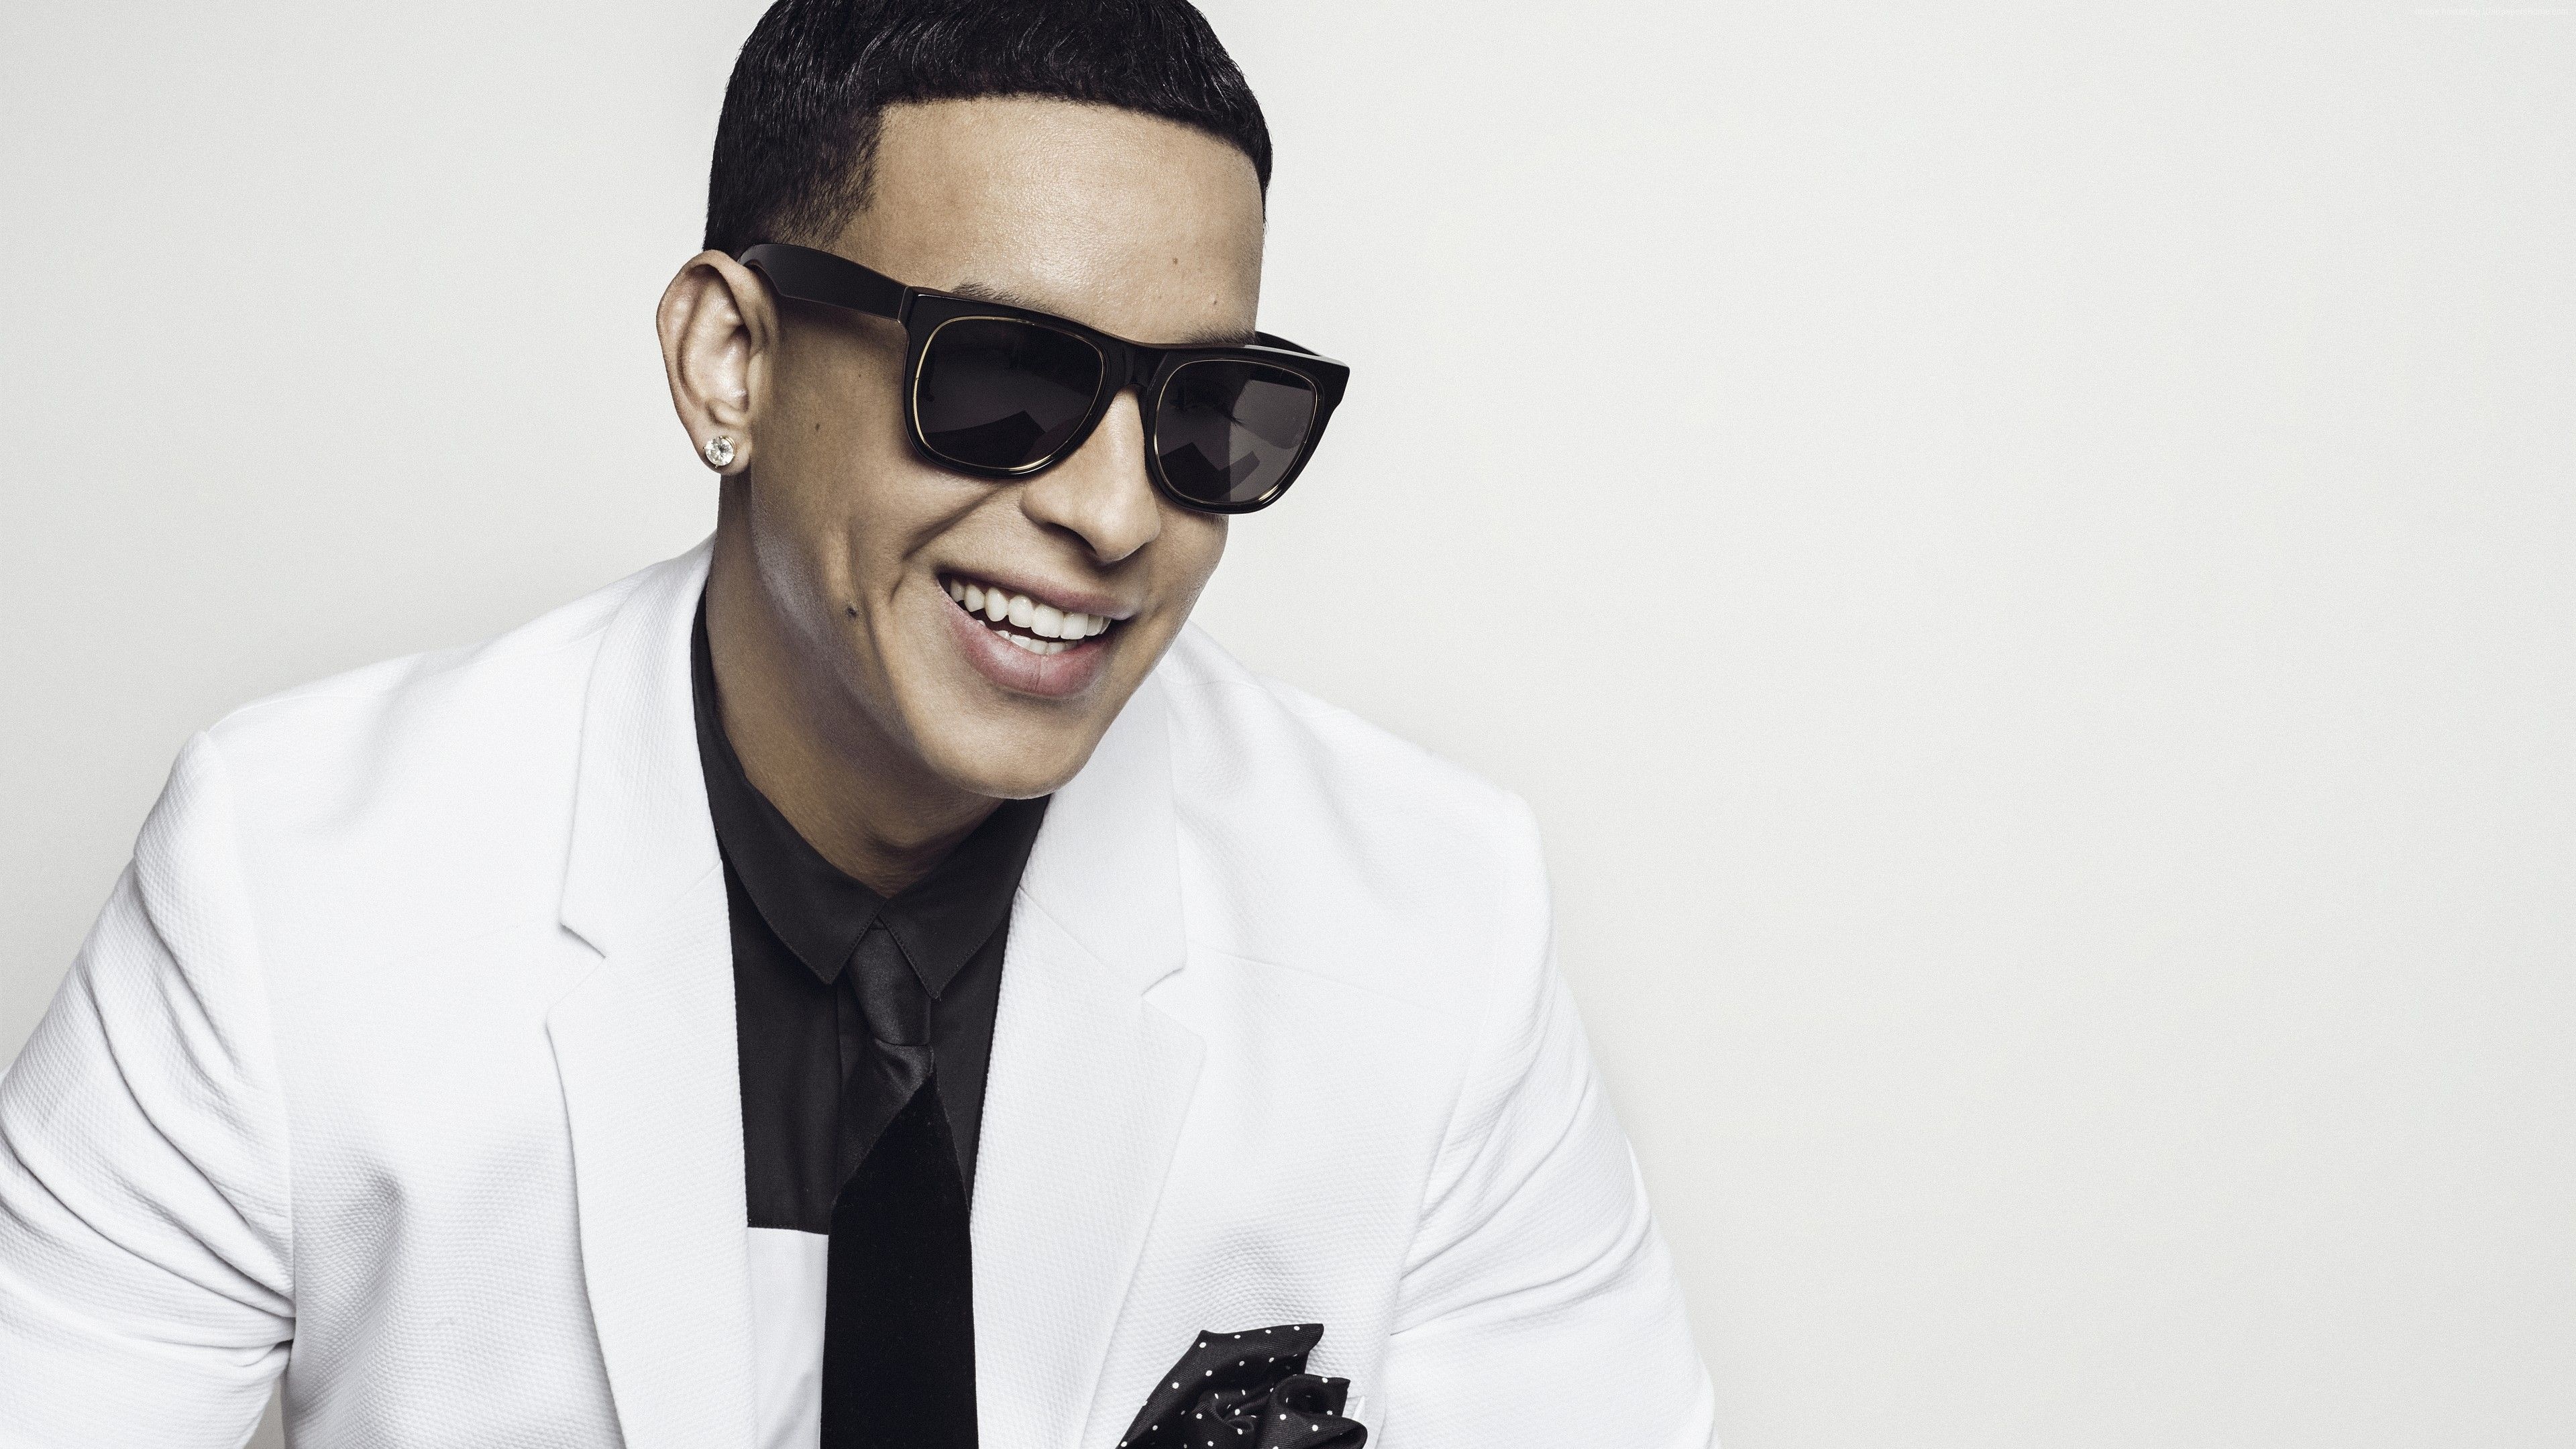 Reggaeton Music: Daddy Yankee, One of the most popular music genres in the Spanish-speaking Caribbean. 3840x2160 4K Background.